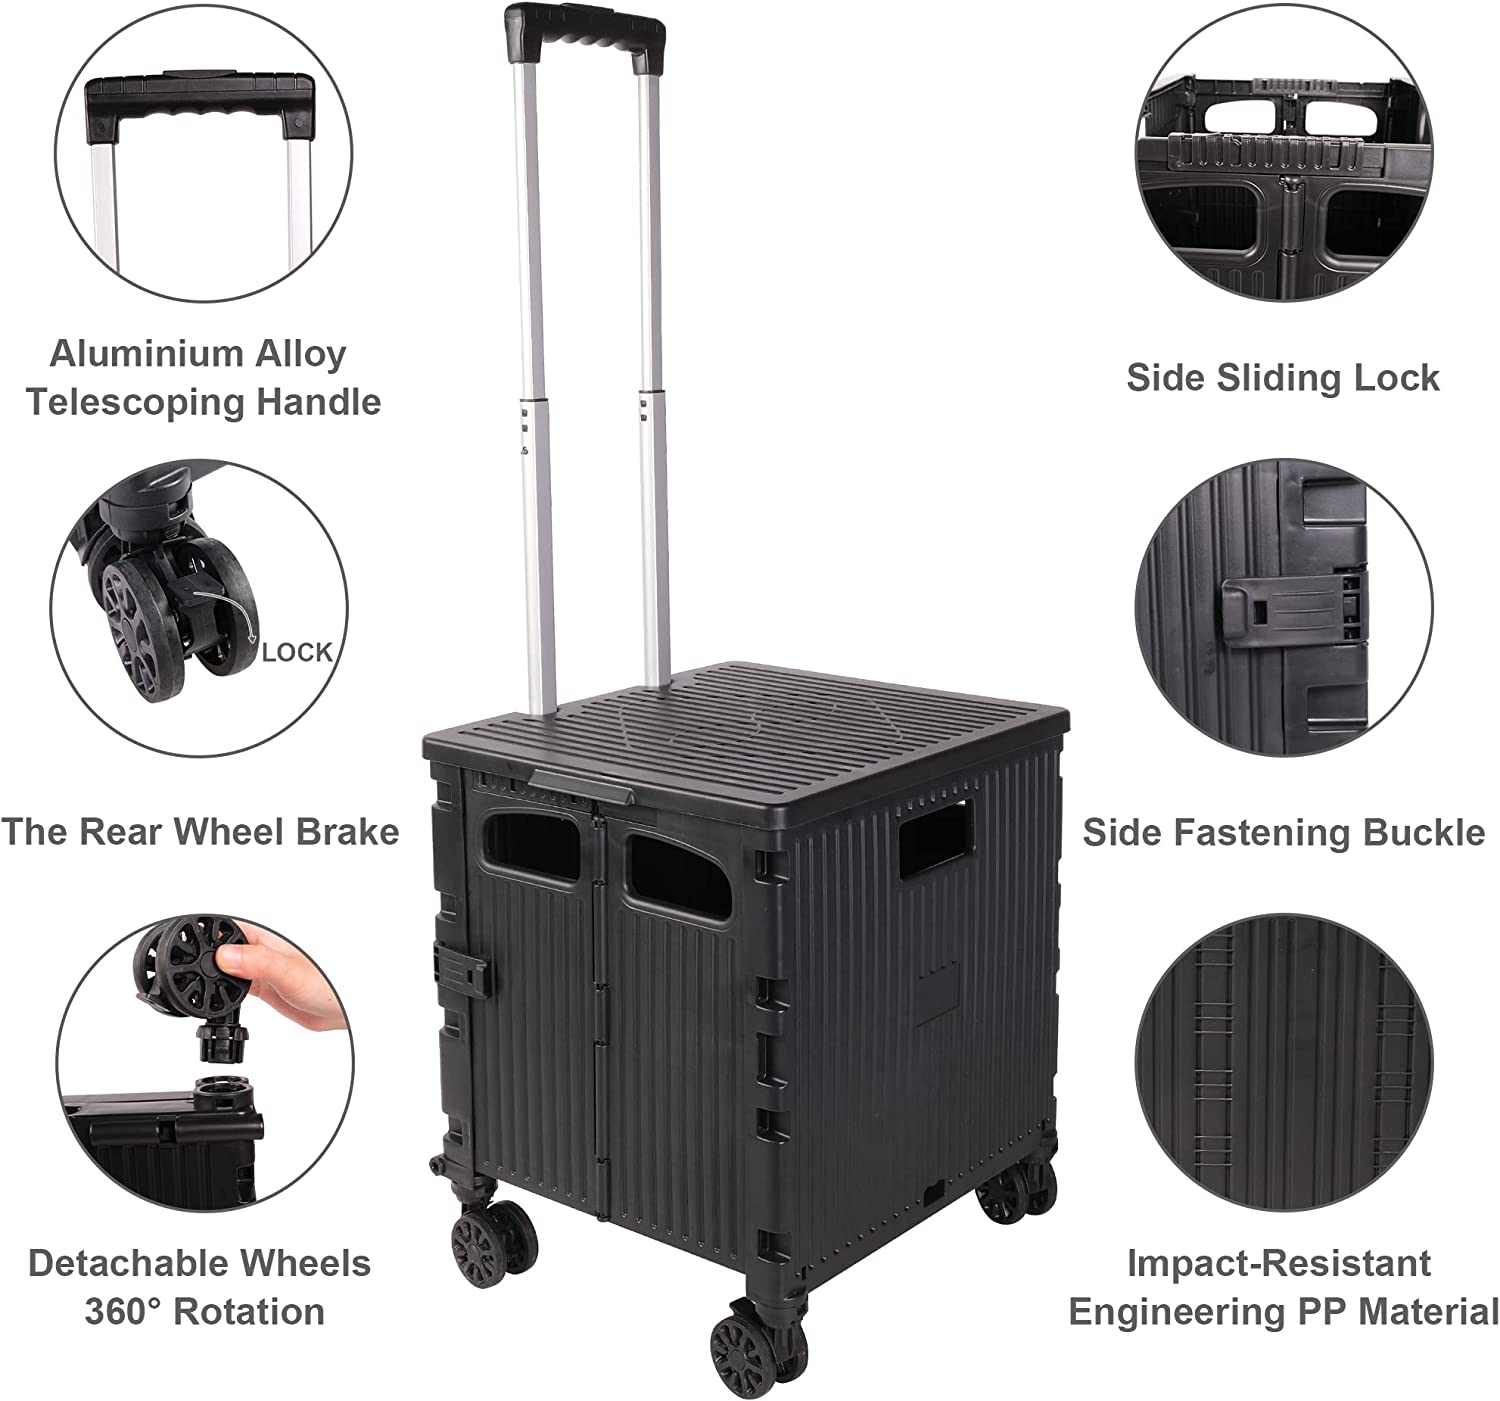 Foldable Portable Storage Rolling Utility Cart  Crate with Telescoping Handle & Lid, Black